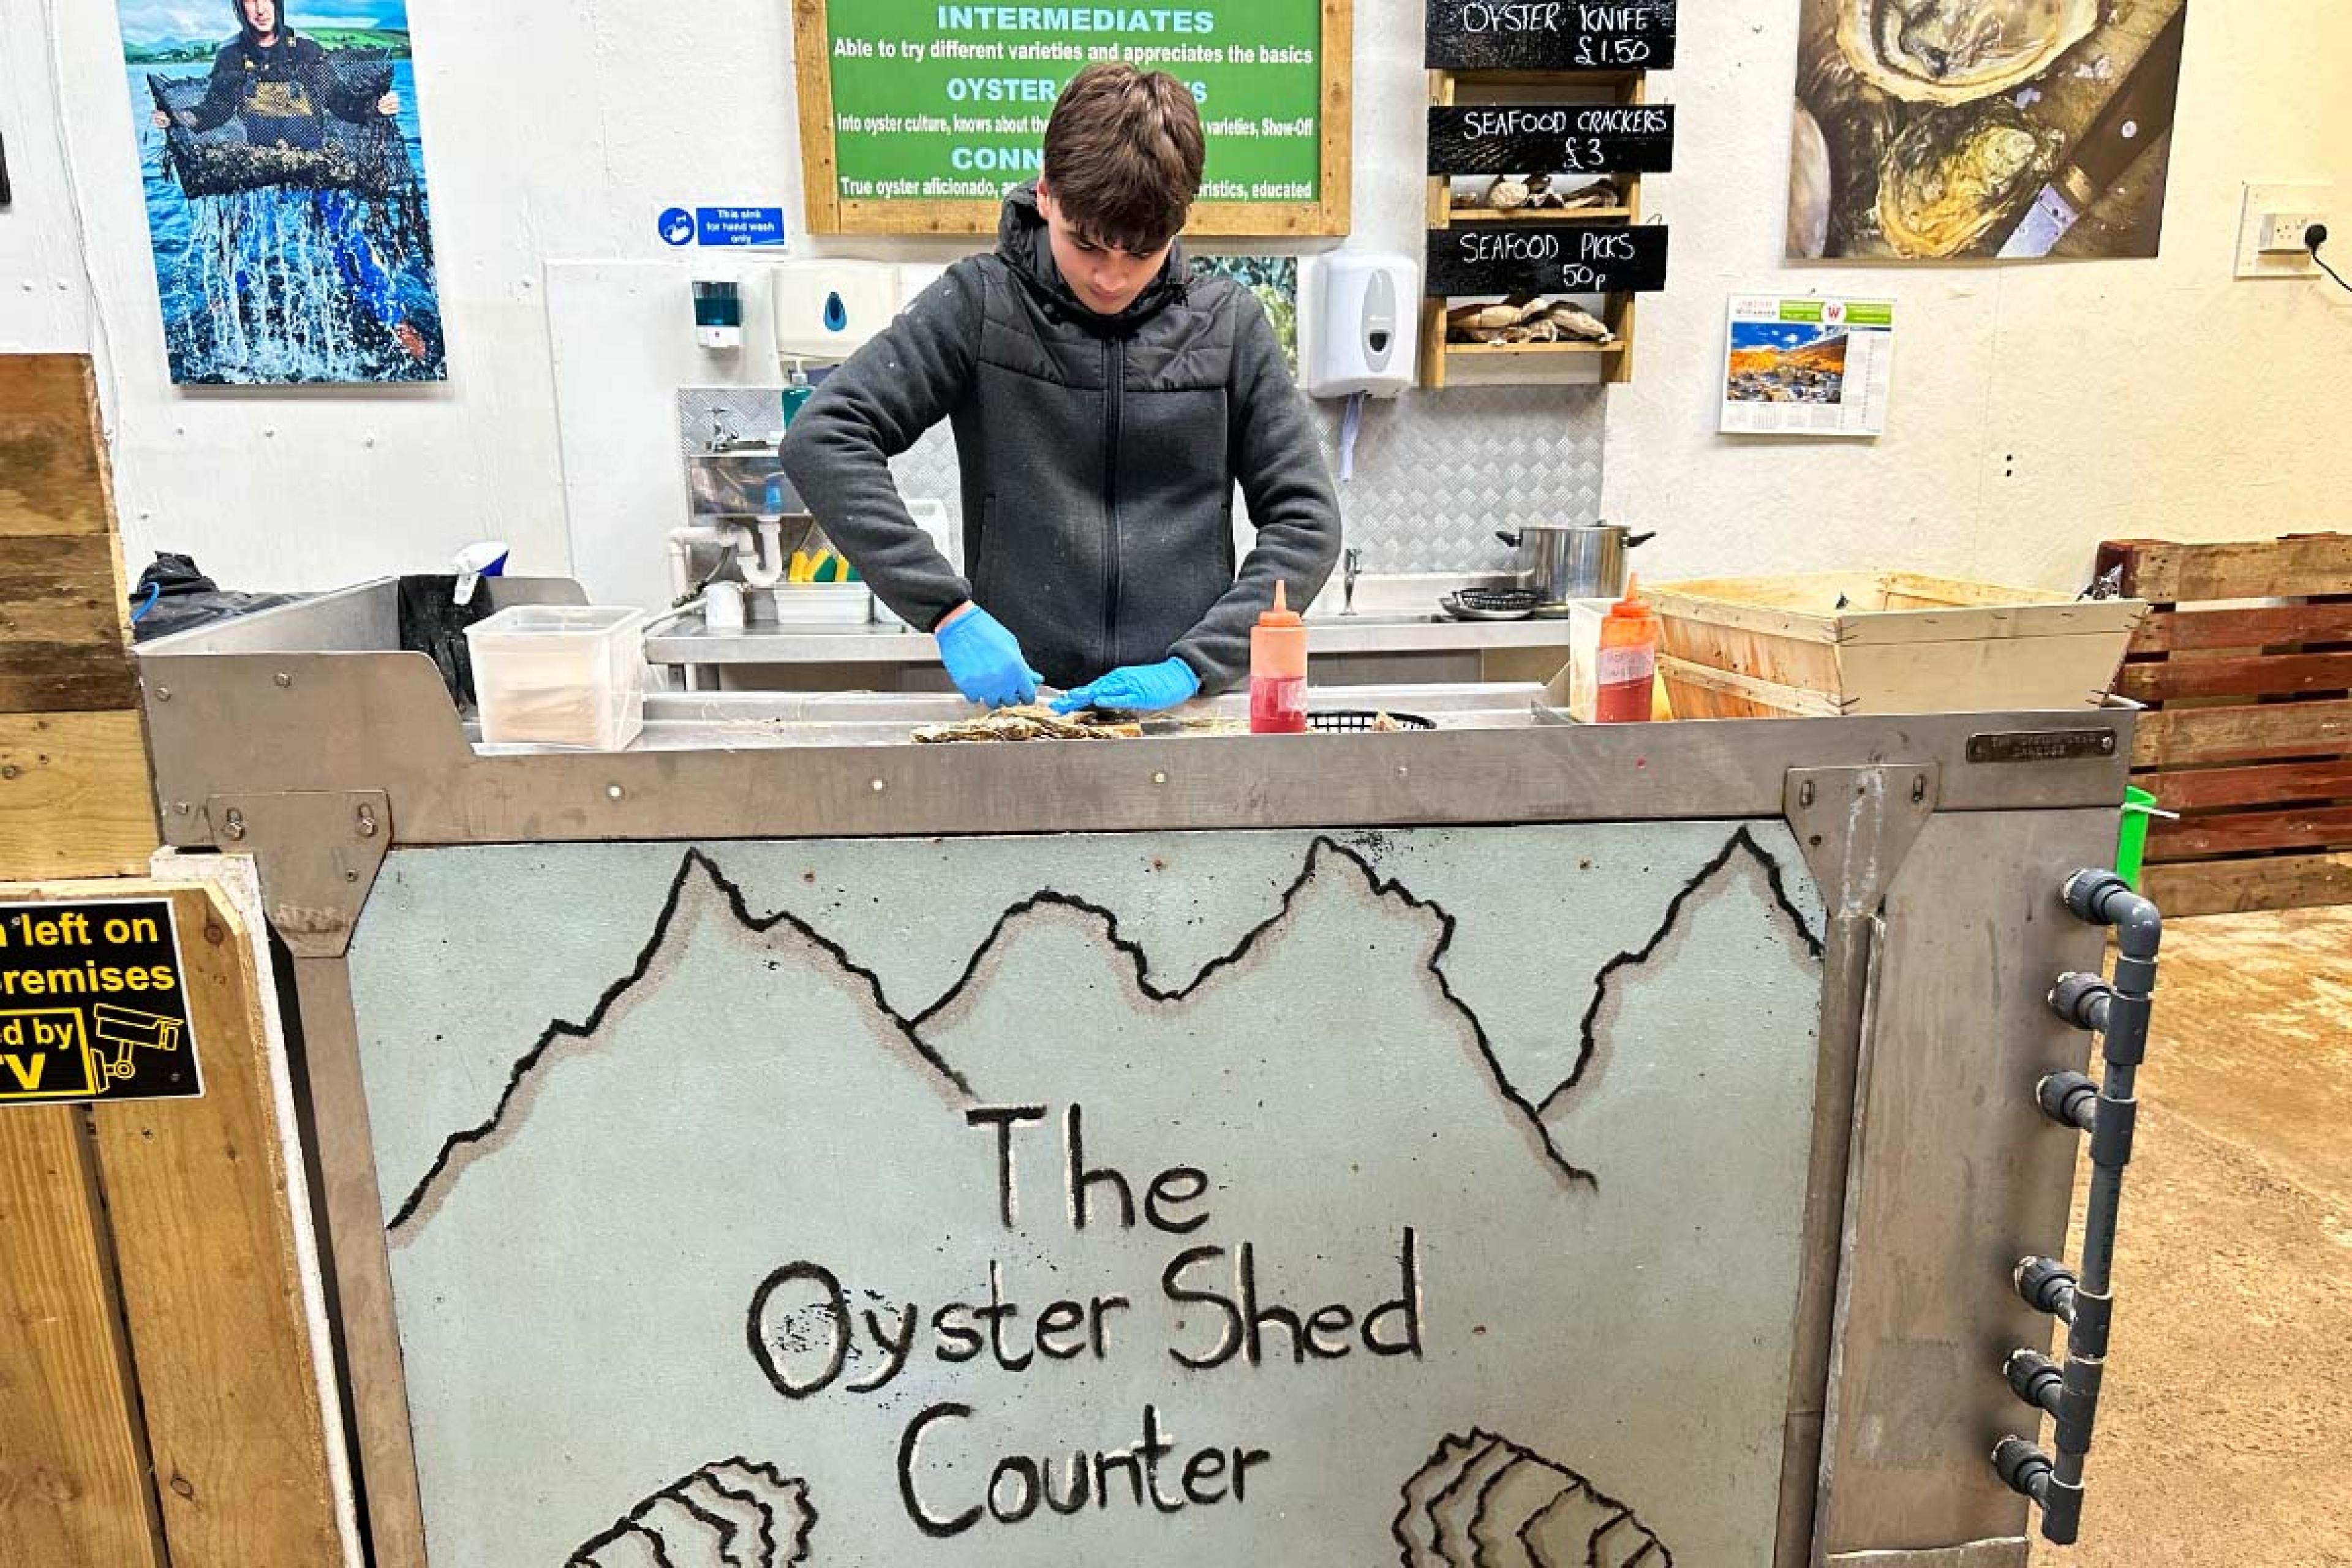 rustic counter with a man preparing seafood behind it